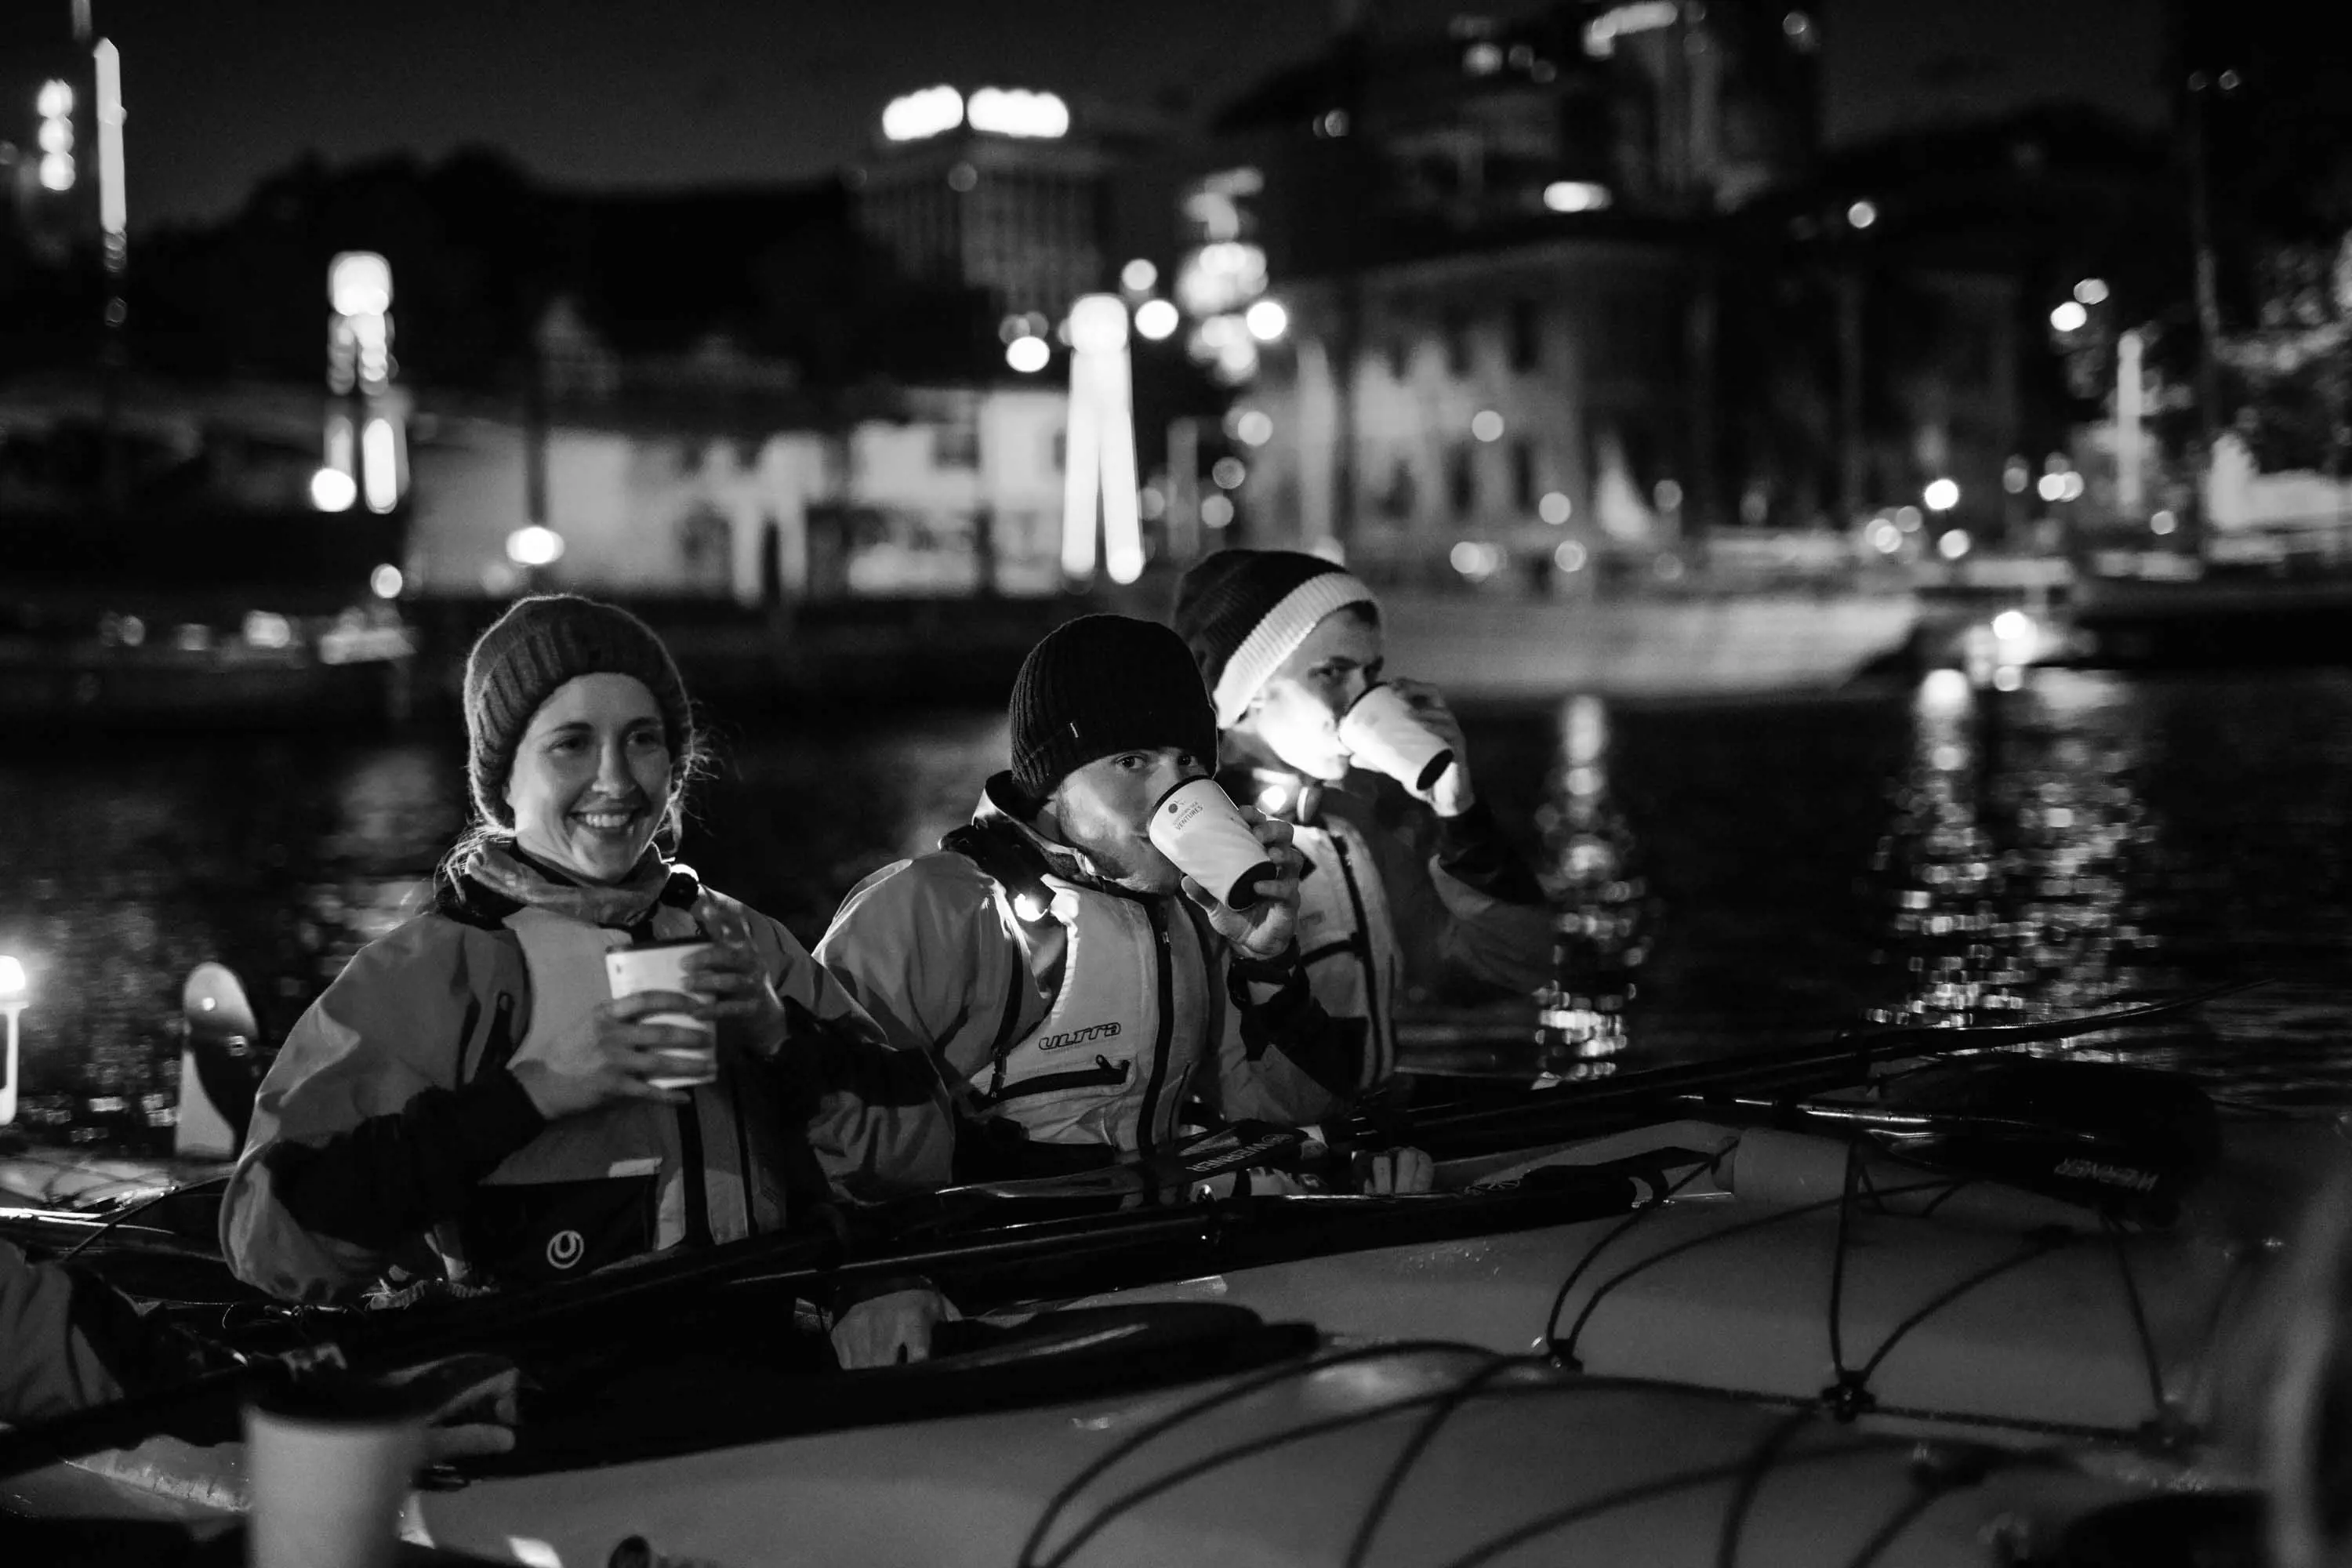 3 people float in small canoes on the water at a port, wearing beanies and sipping at hot drinks in cups.